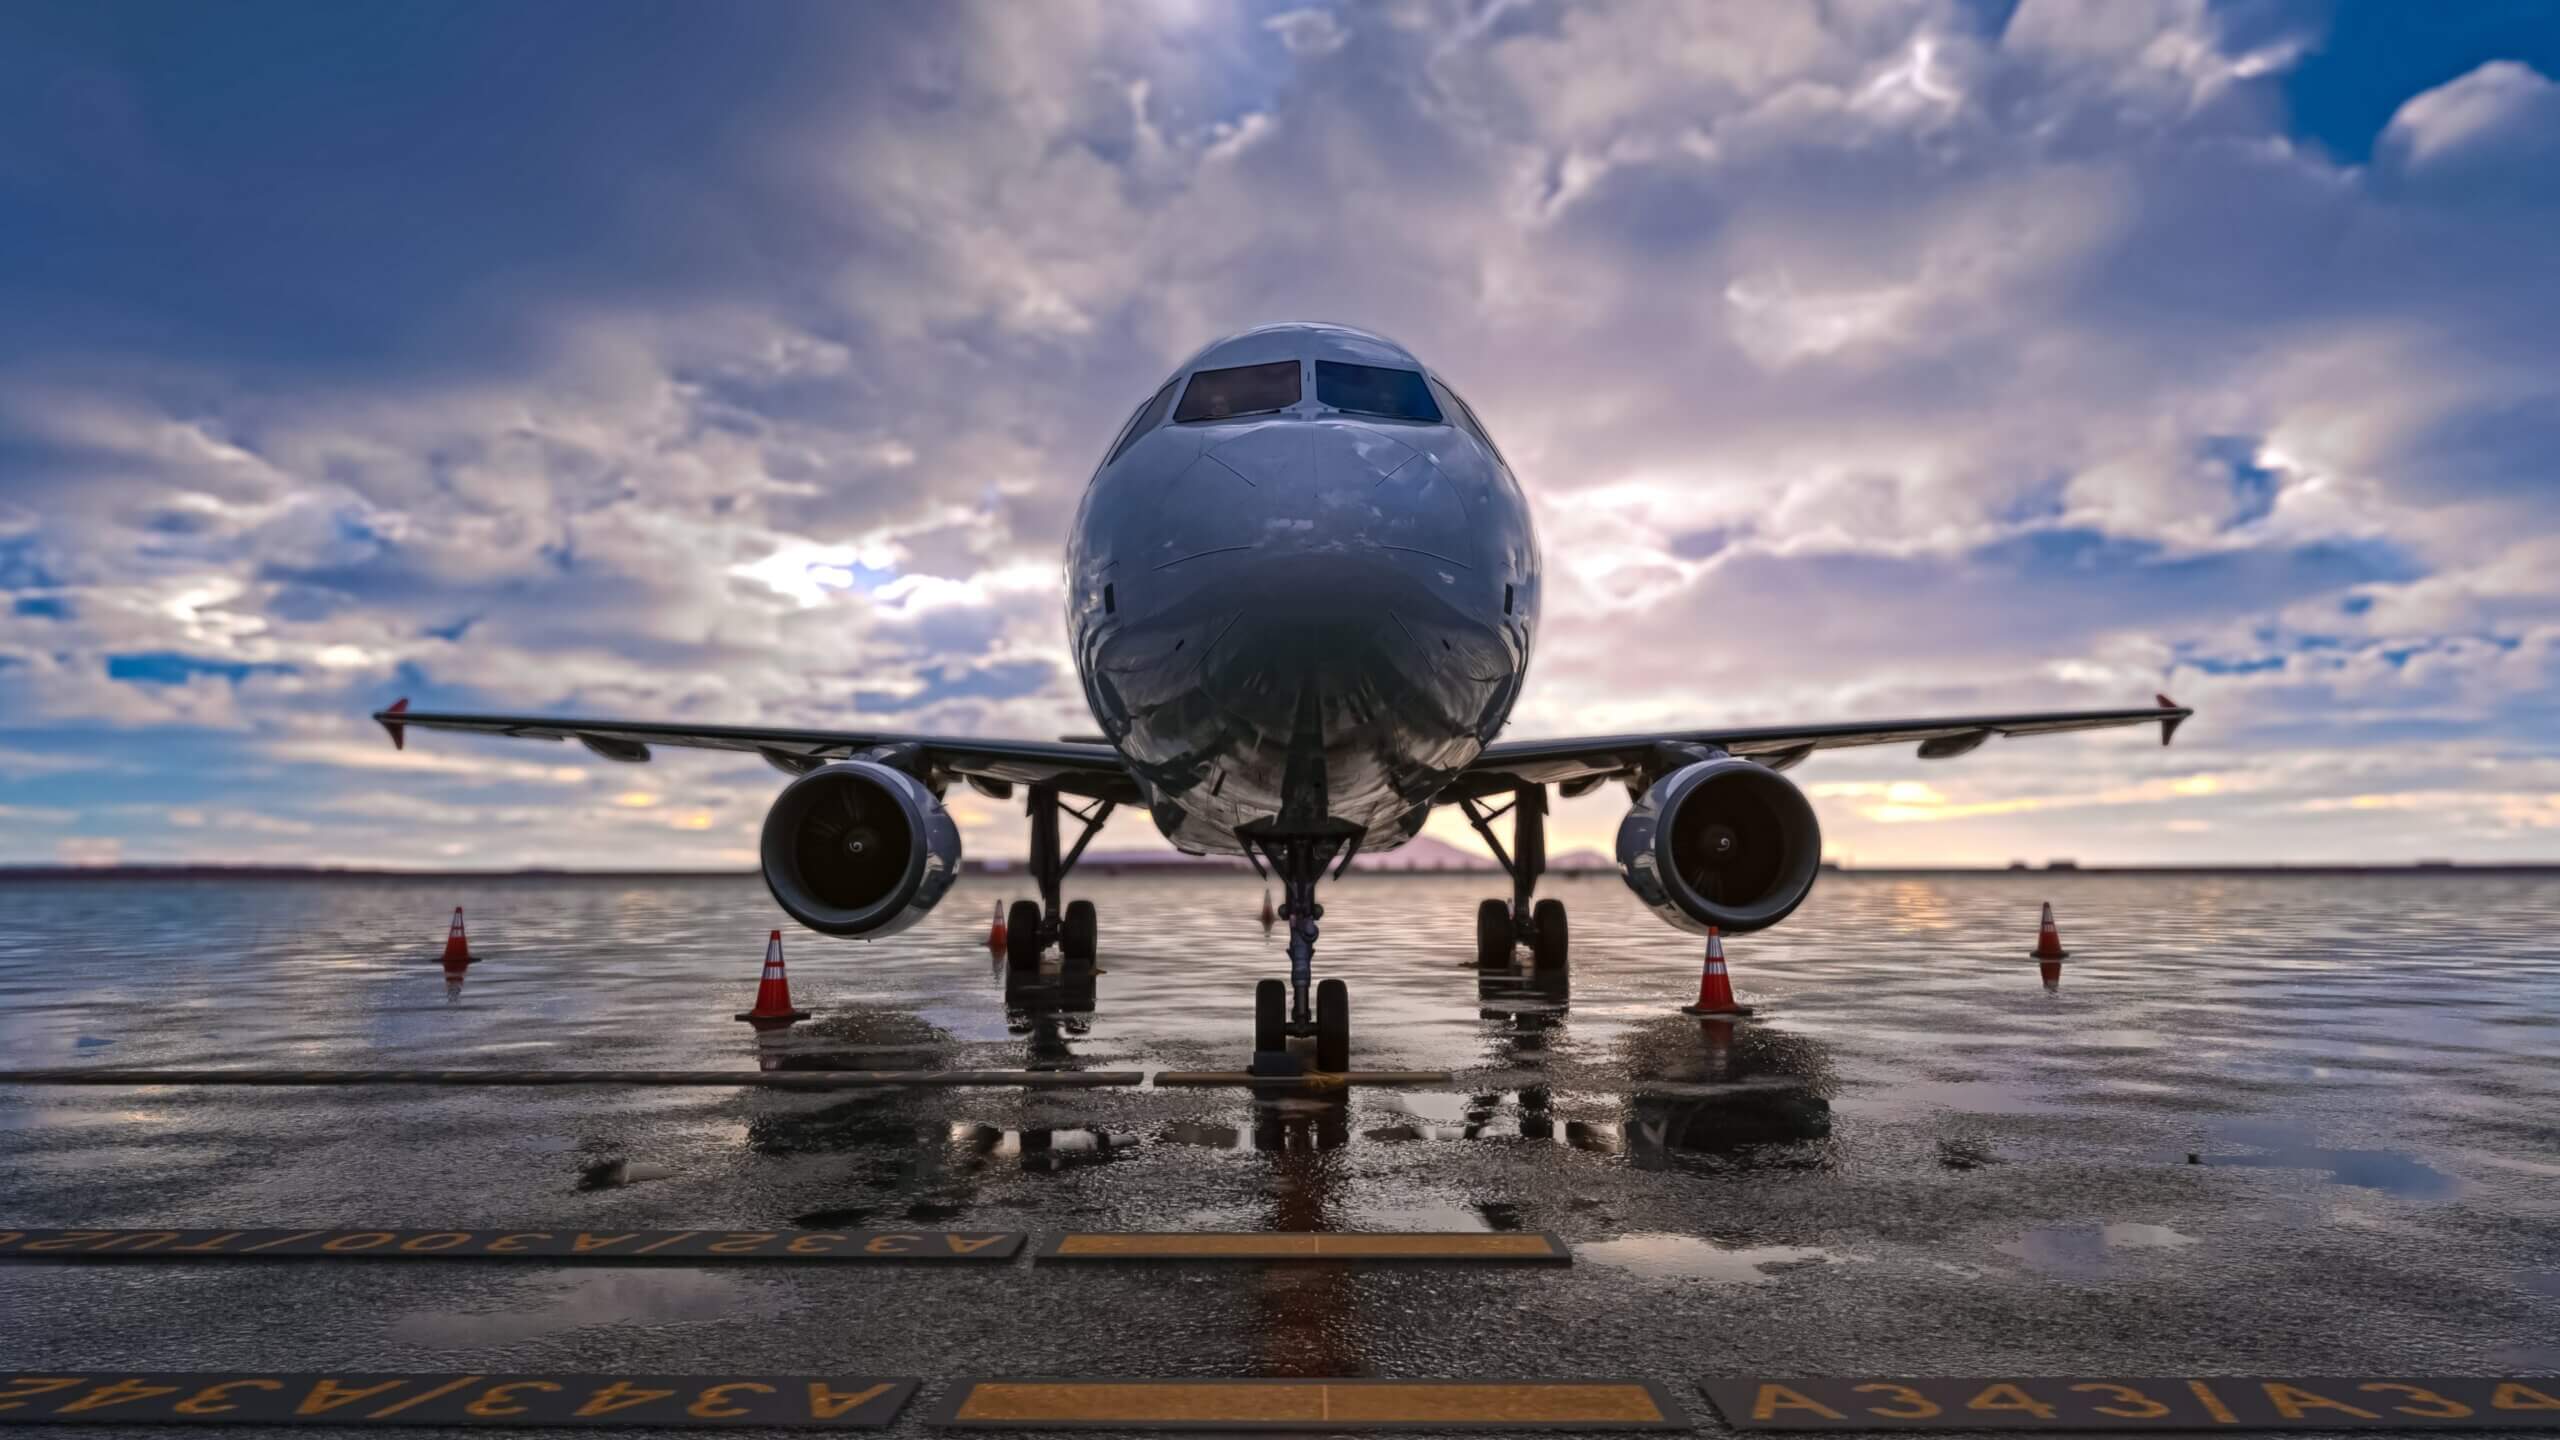 A front view of a large airplane on a wet tarmac. The sun rises in the distance behind it.